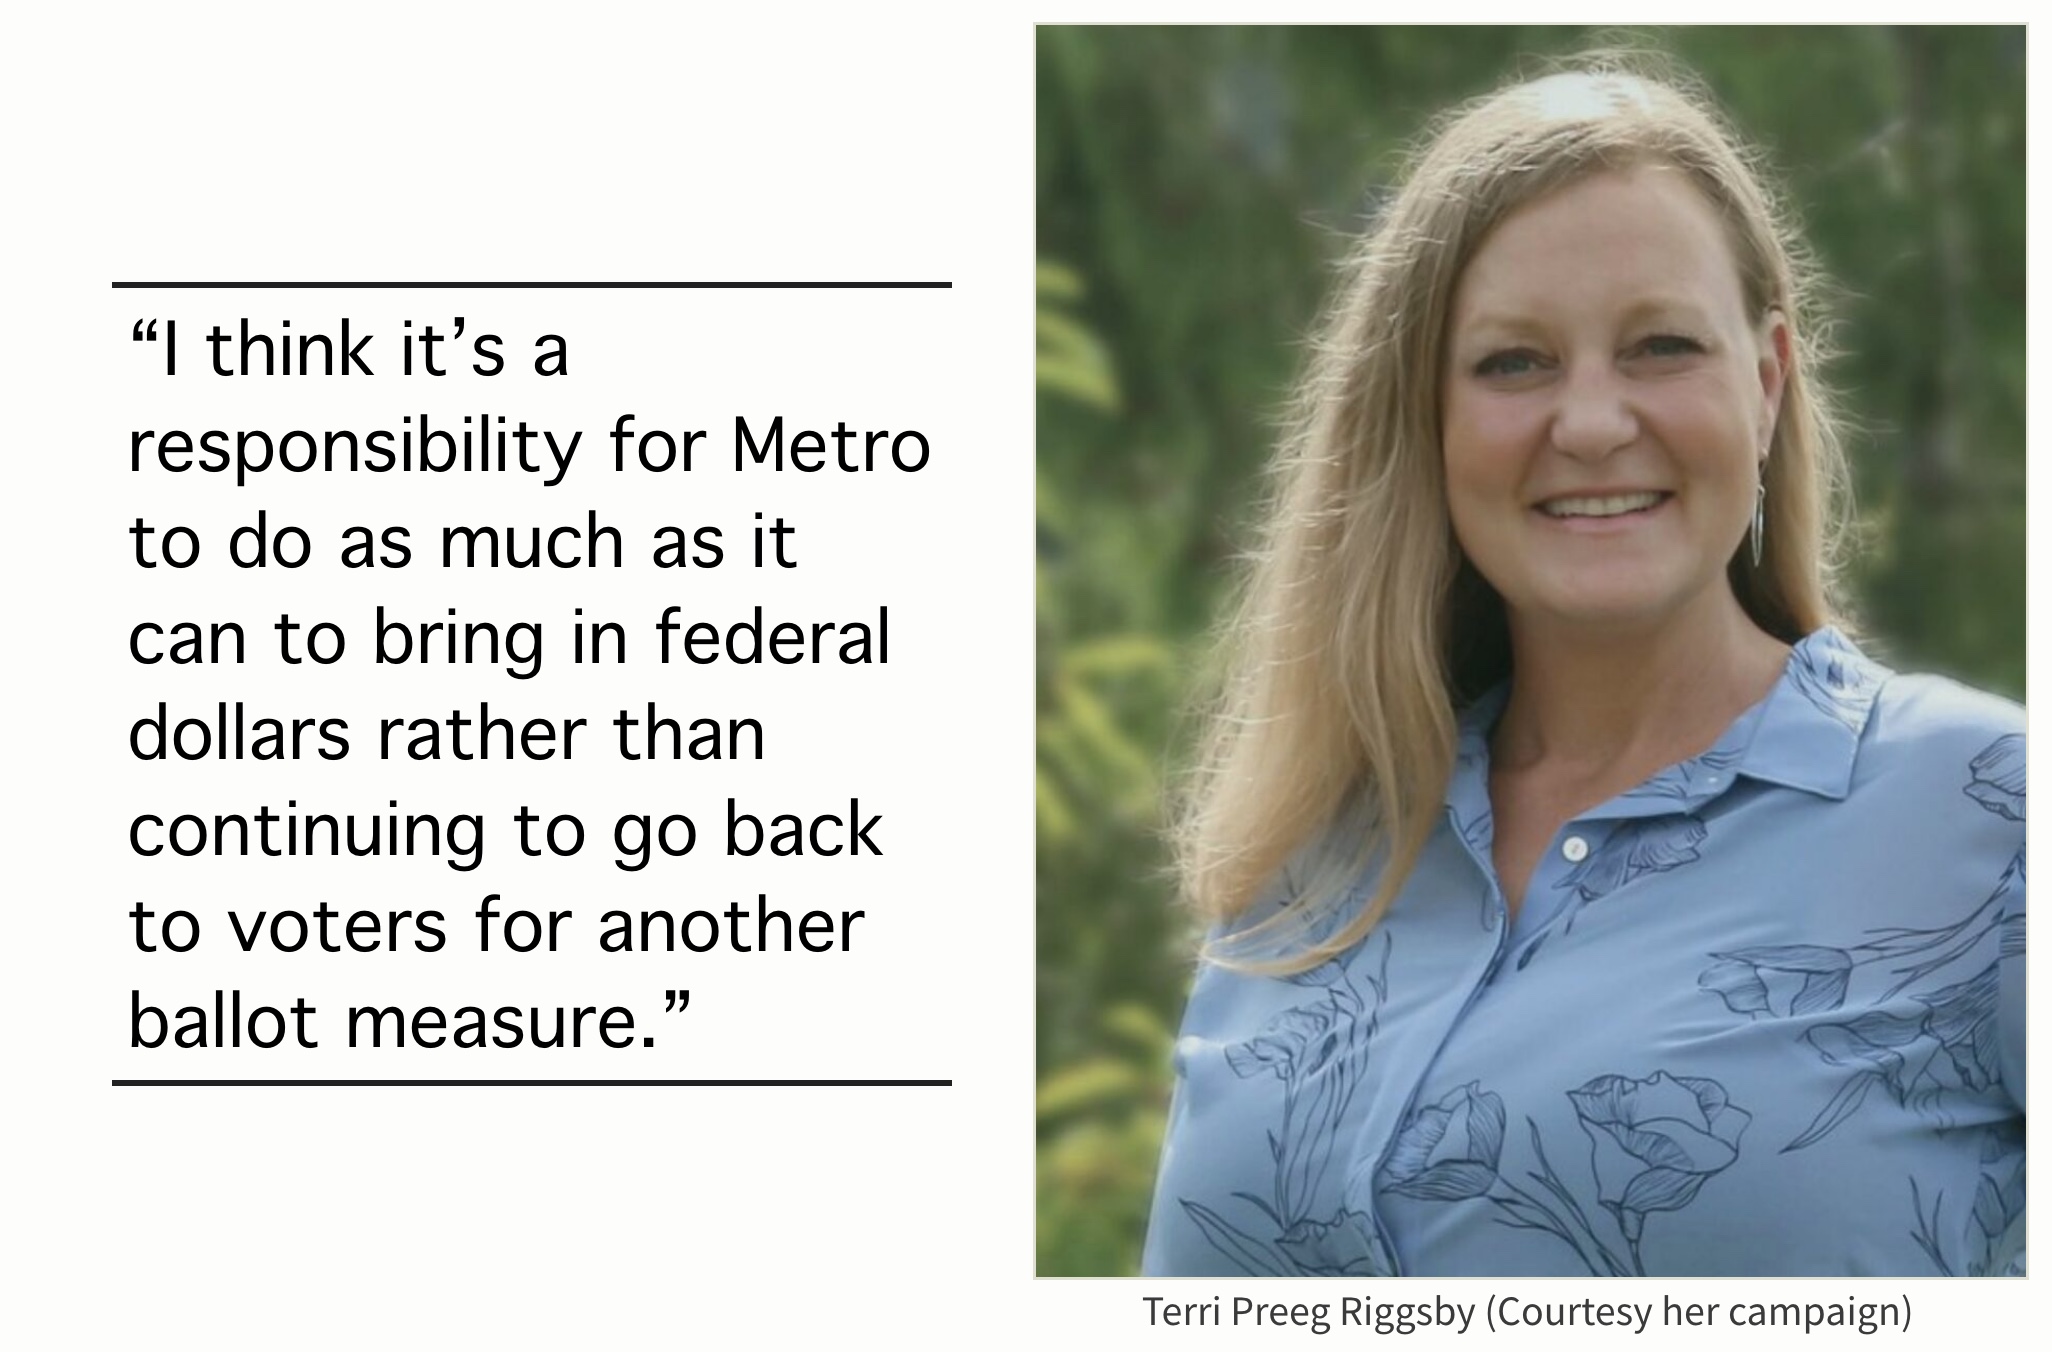 "I think it's a responsibility for Metro to do as much as it can to bring in federal dollars rather than continuing to go back to voters for another ballot measure." - Person with blonde hair and blue shirt smiling in a portrait taken against a green outdoor background.